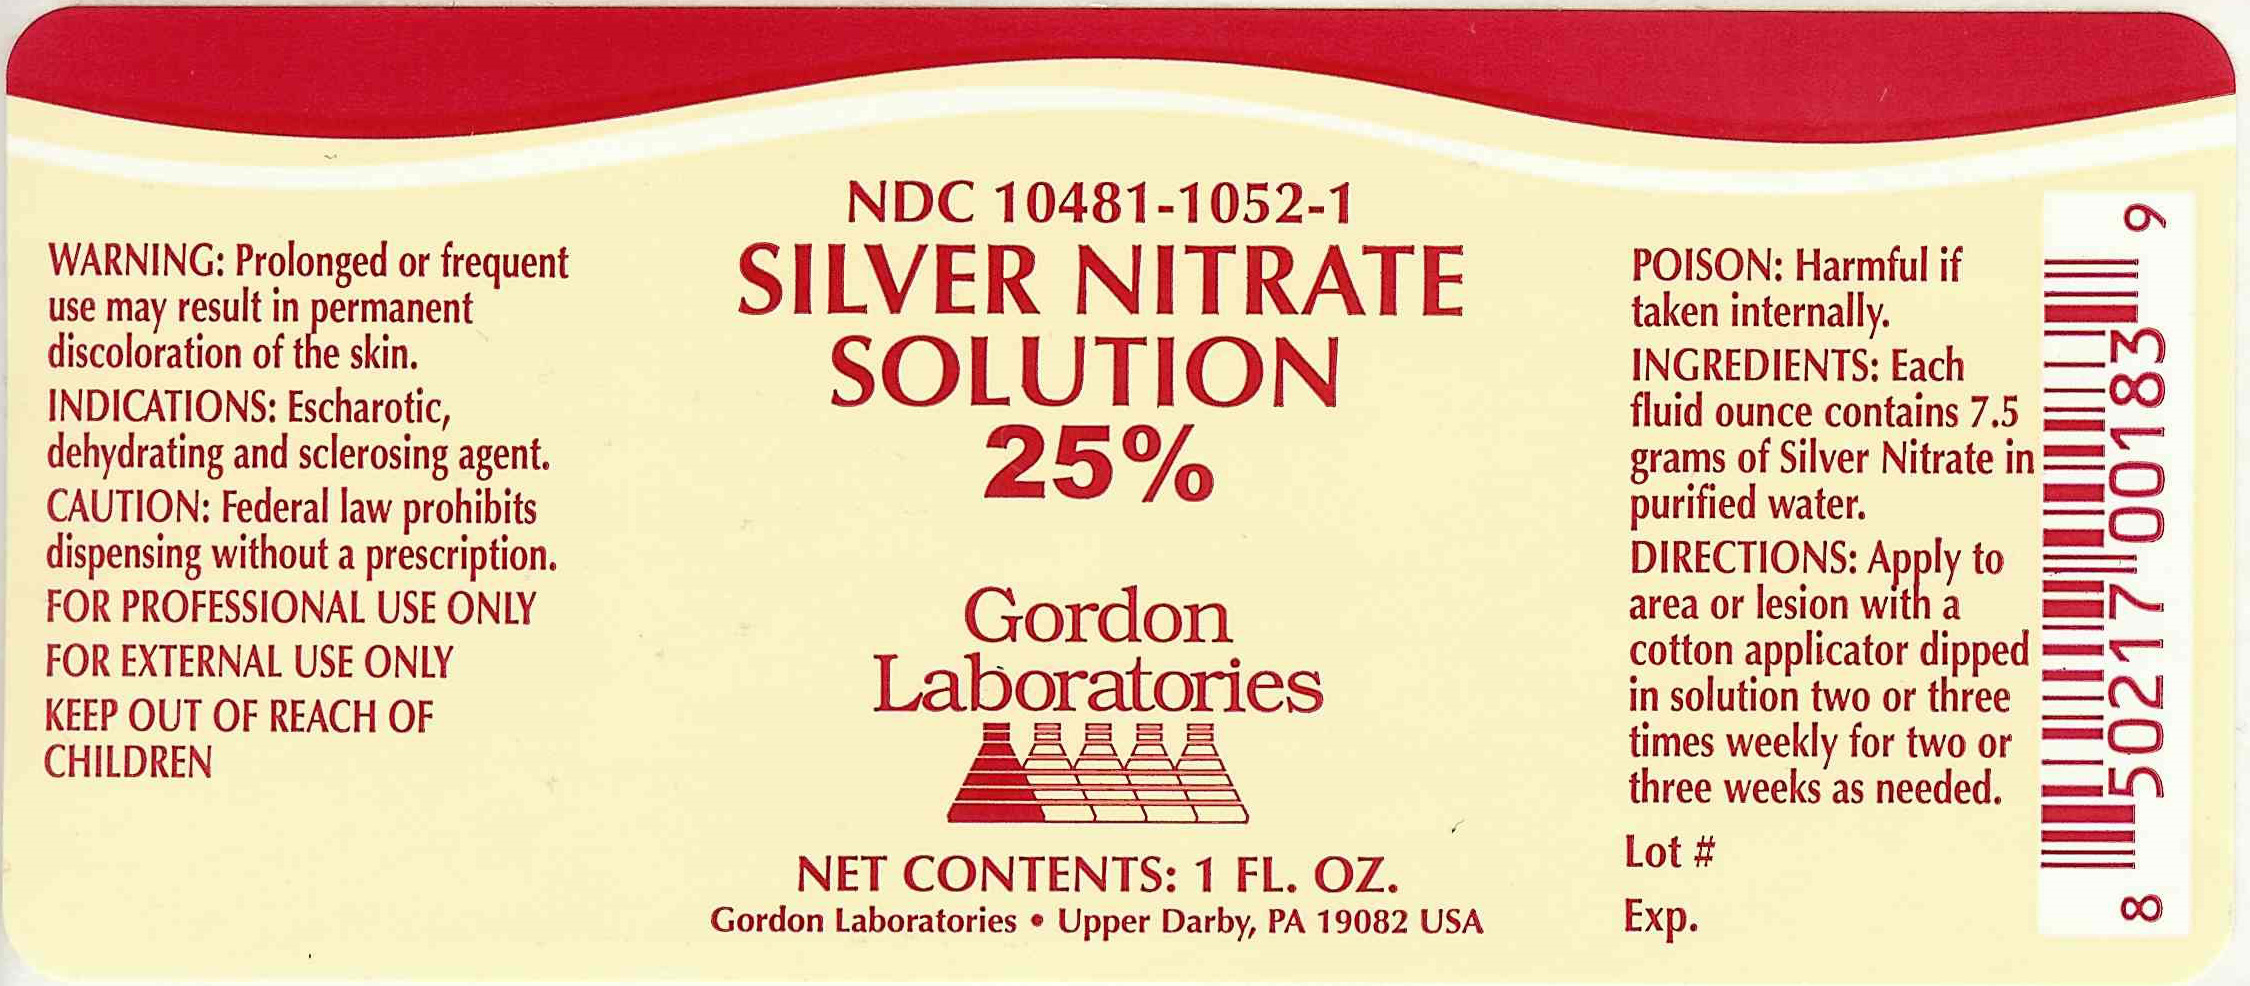 Image of Silver Nitrate Solution 25% Label